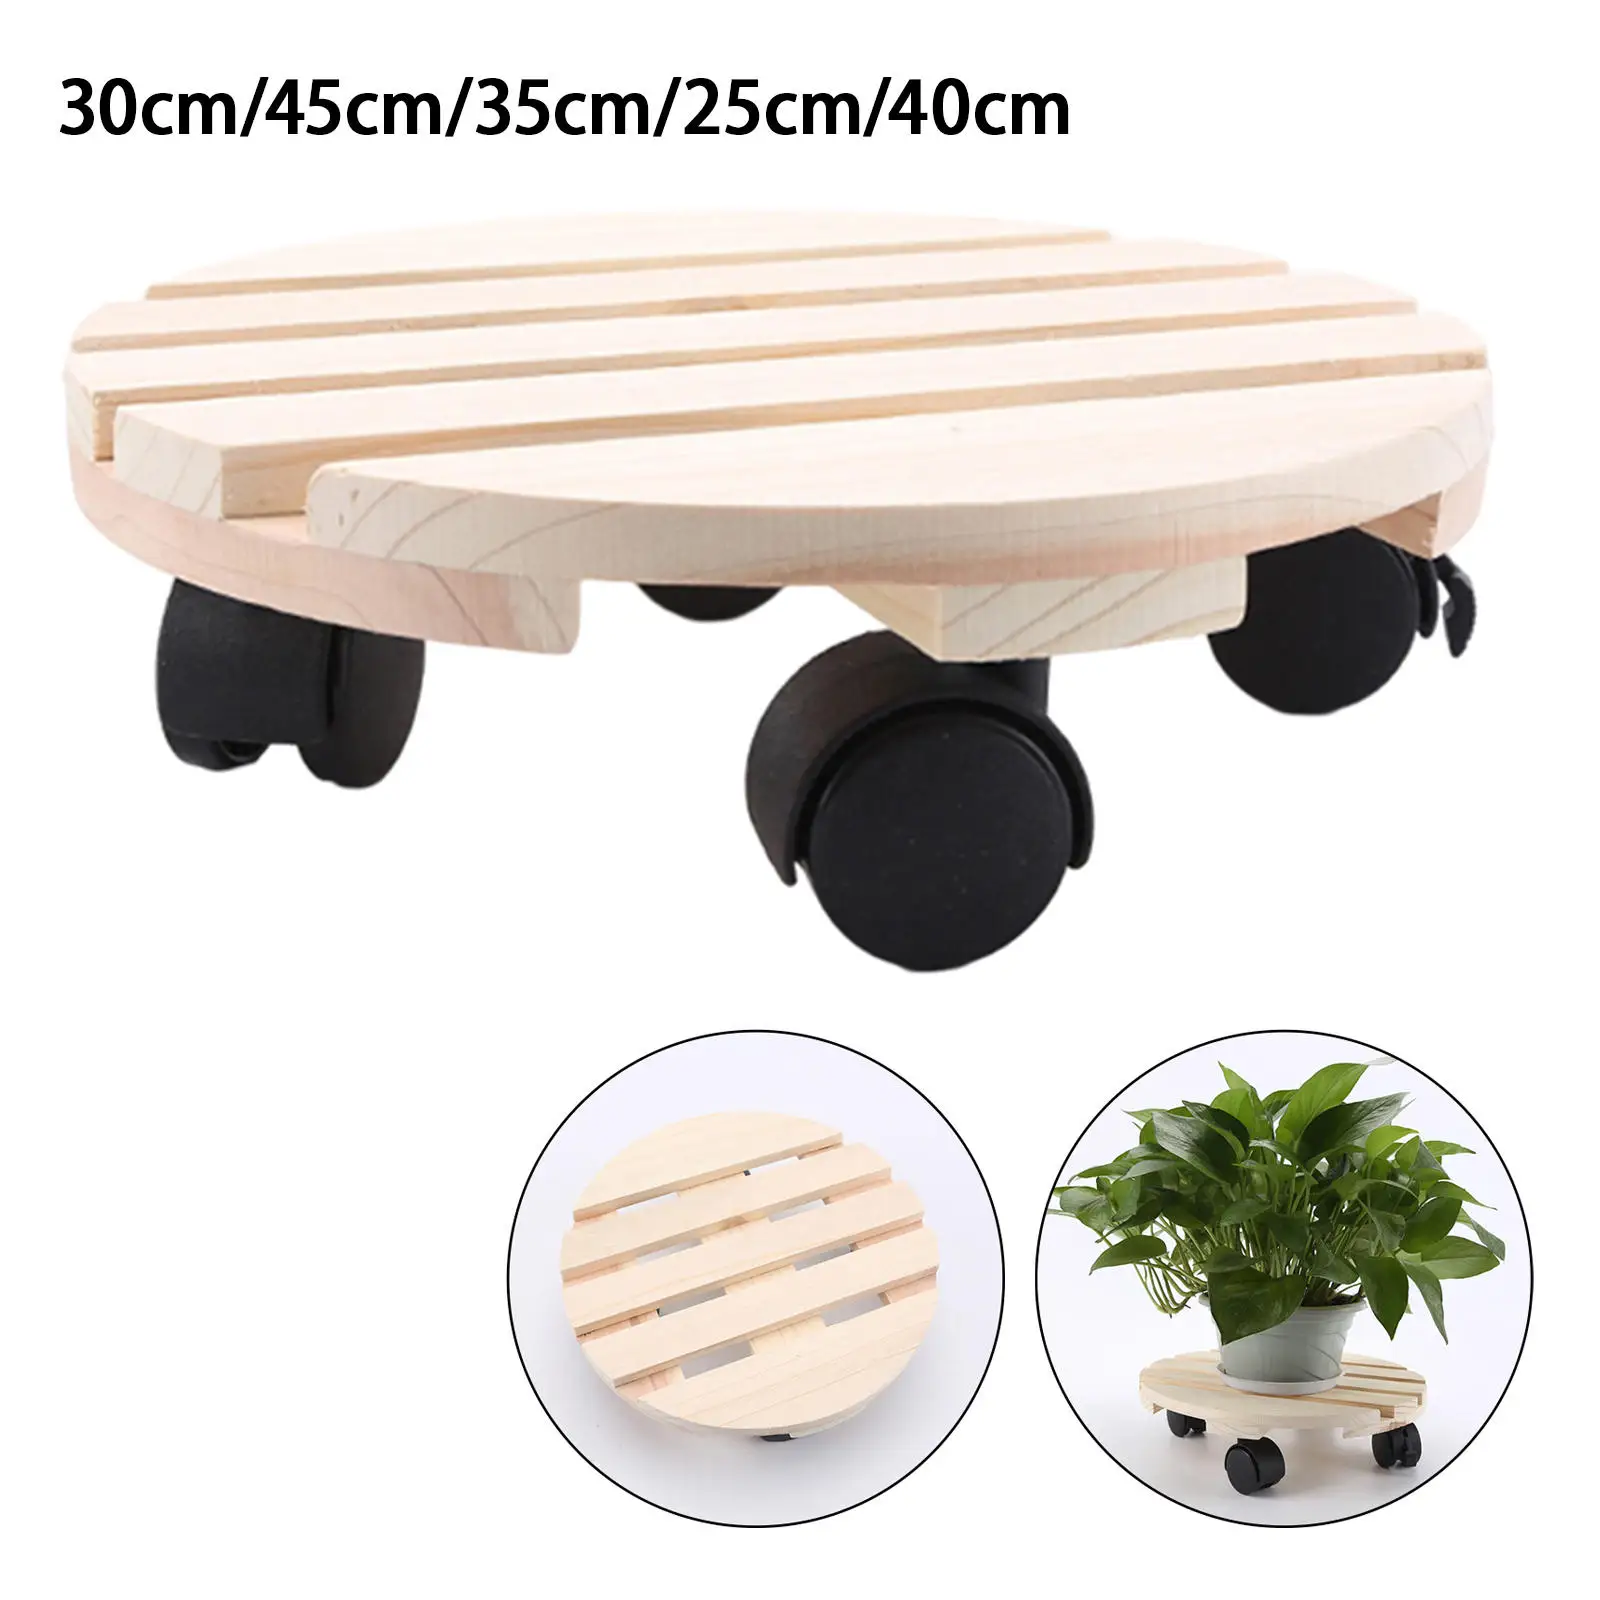 olling Wooden Planter Caddy Potted Plant Stand With Wheel Round Flower Pot Rack Indoor Outdoor Planter Trolley Roller Tray